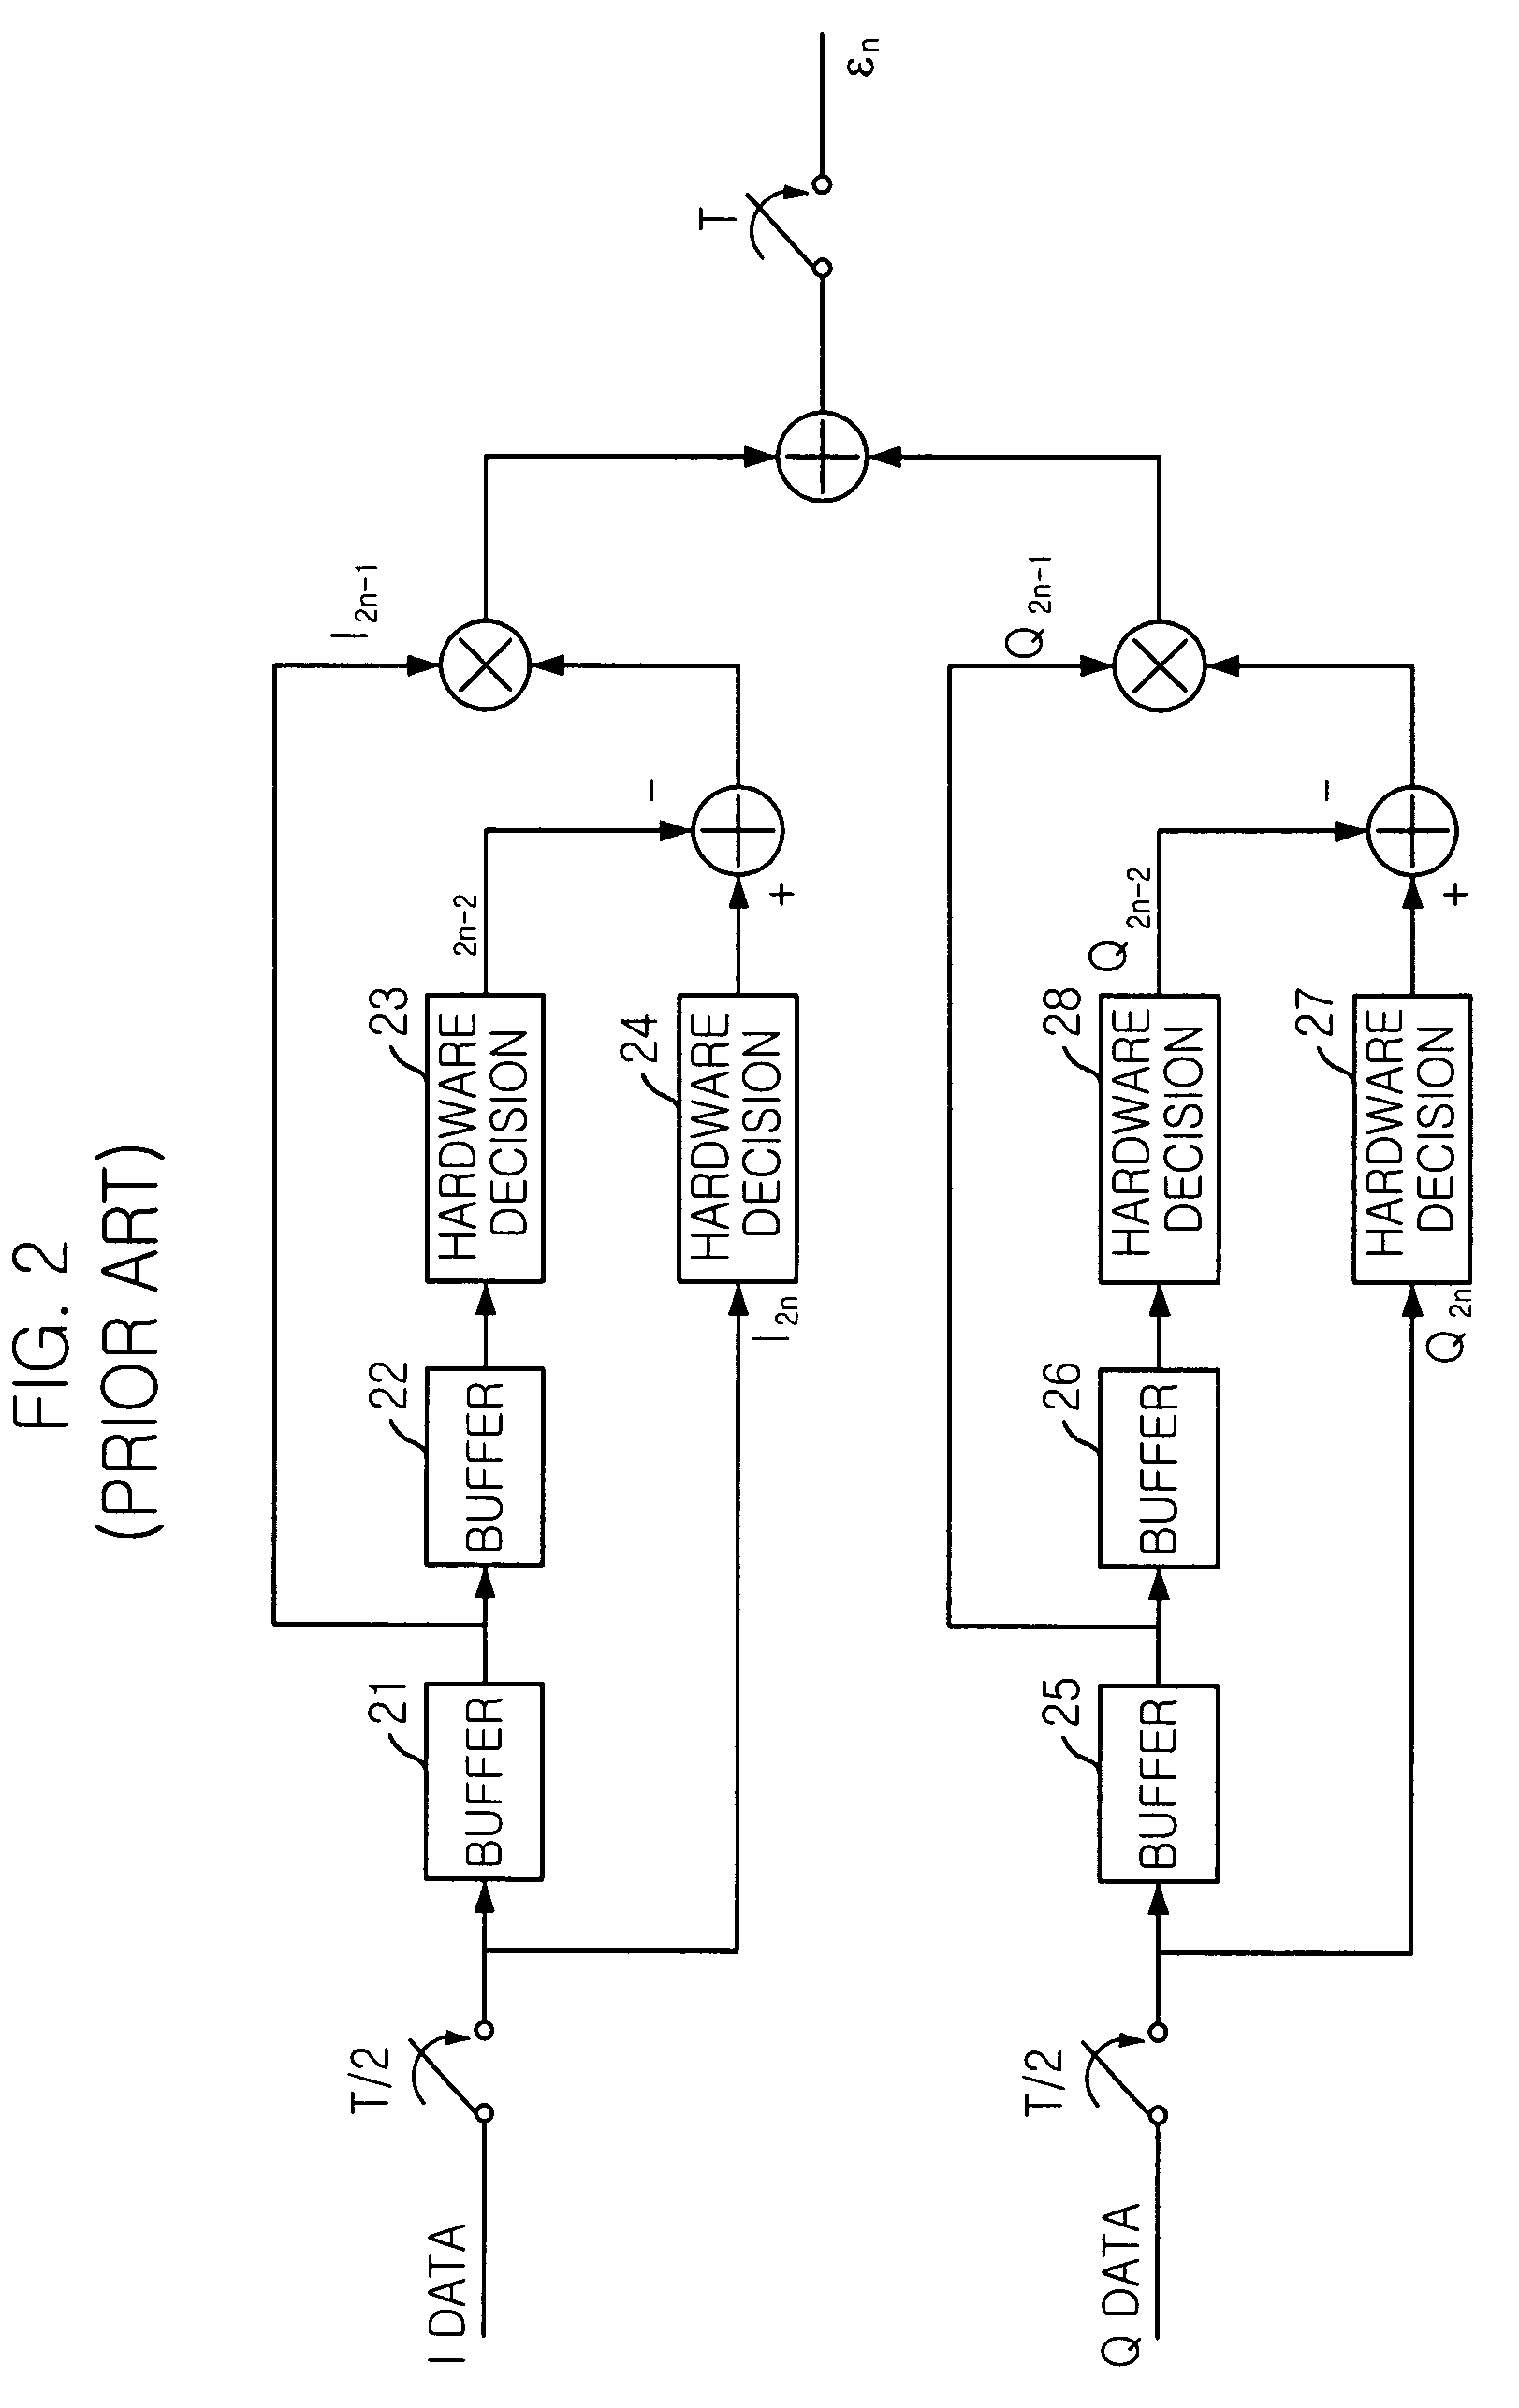 Apparatus and method for synchronizing symbol timing using timing loop controller